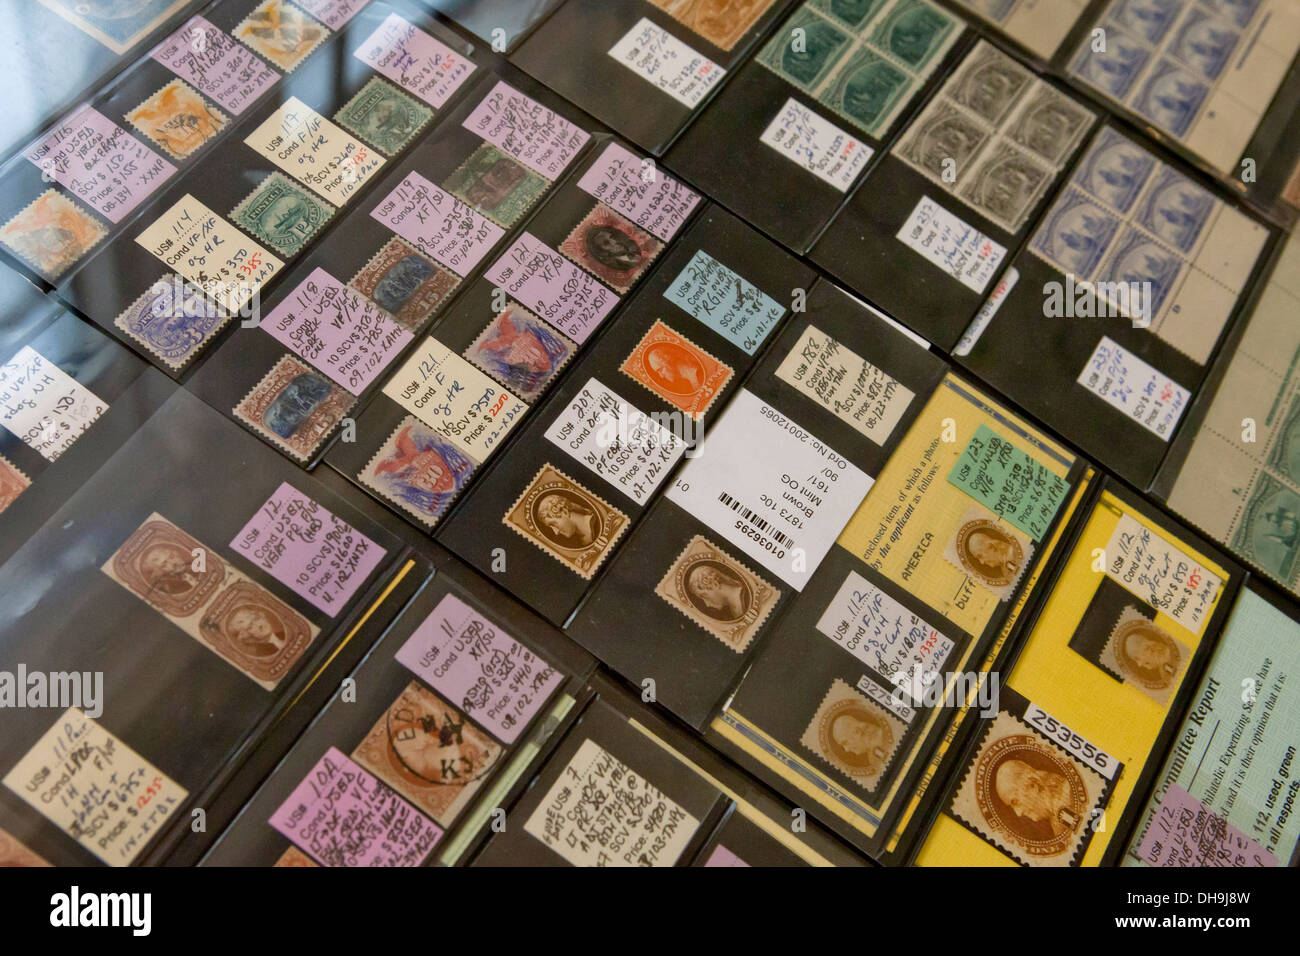 Stamp dealer collection Stock Photo